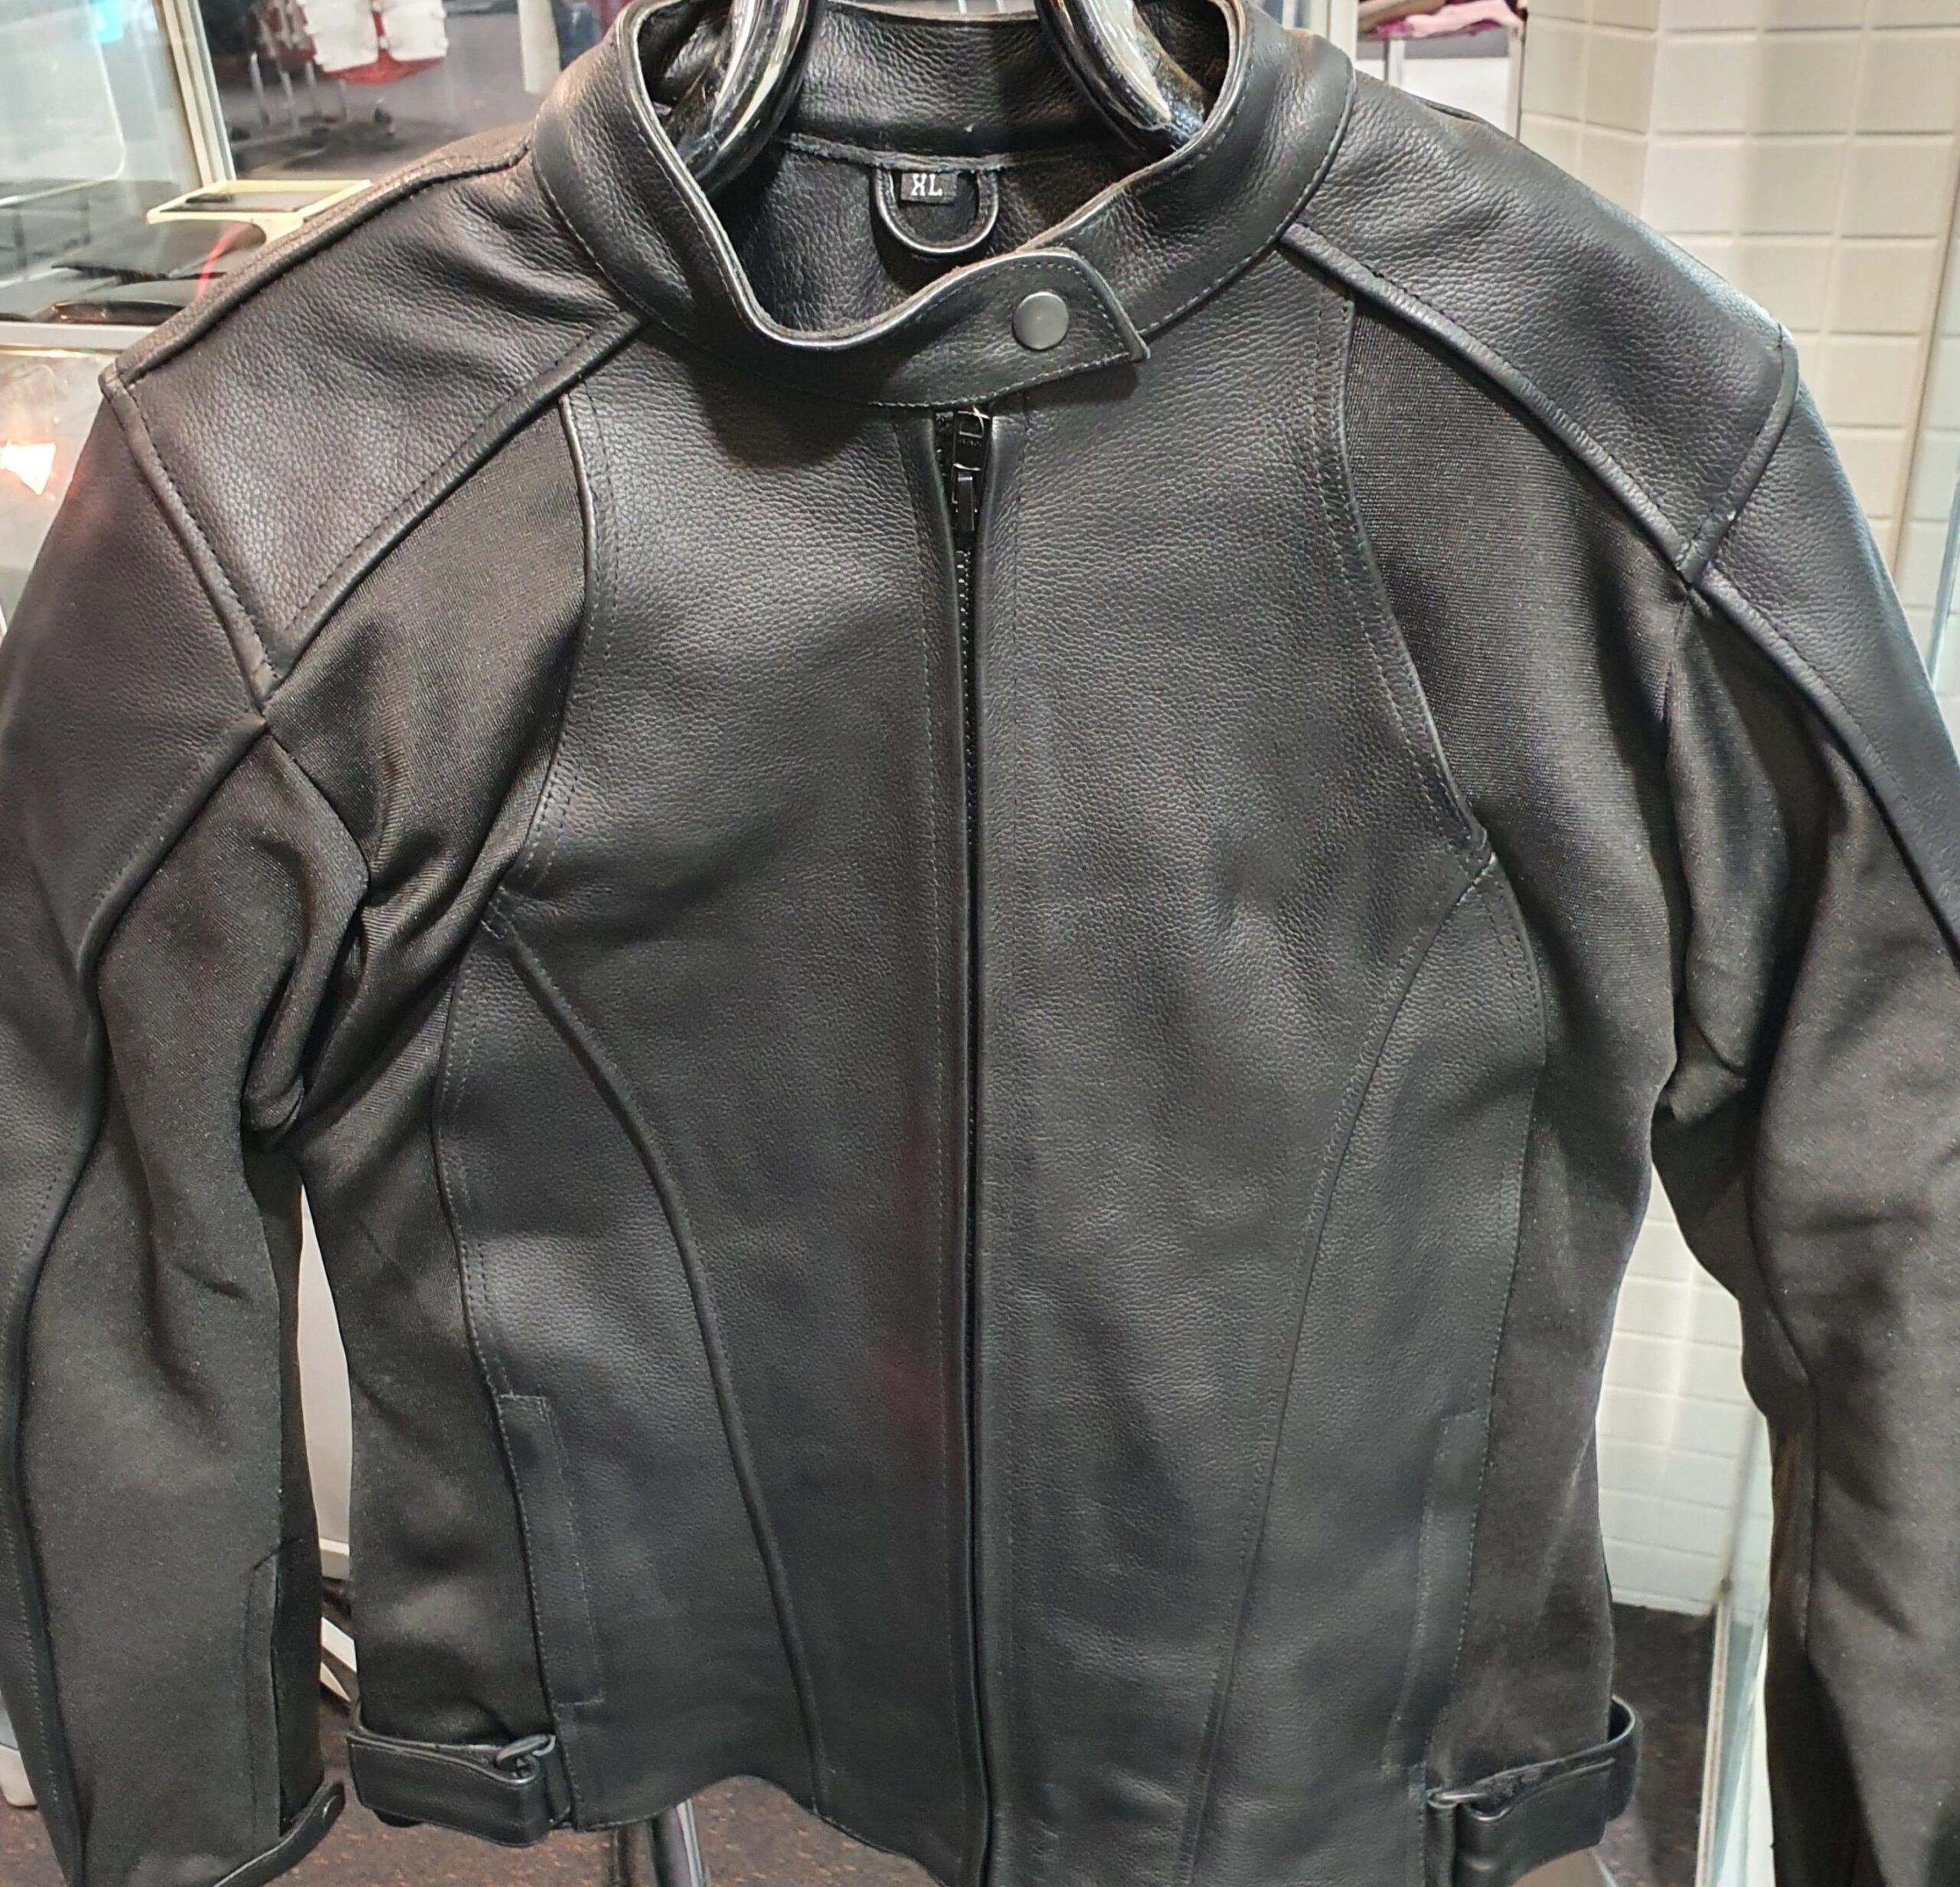 Ladies Motorcycle Leather Jacket - Leather Direct